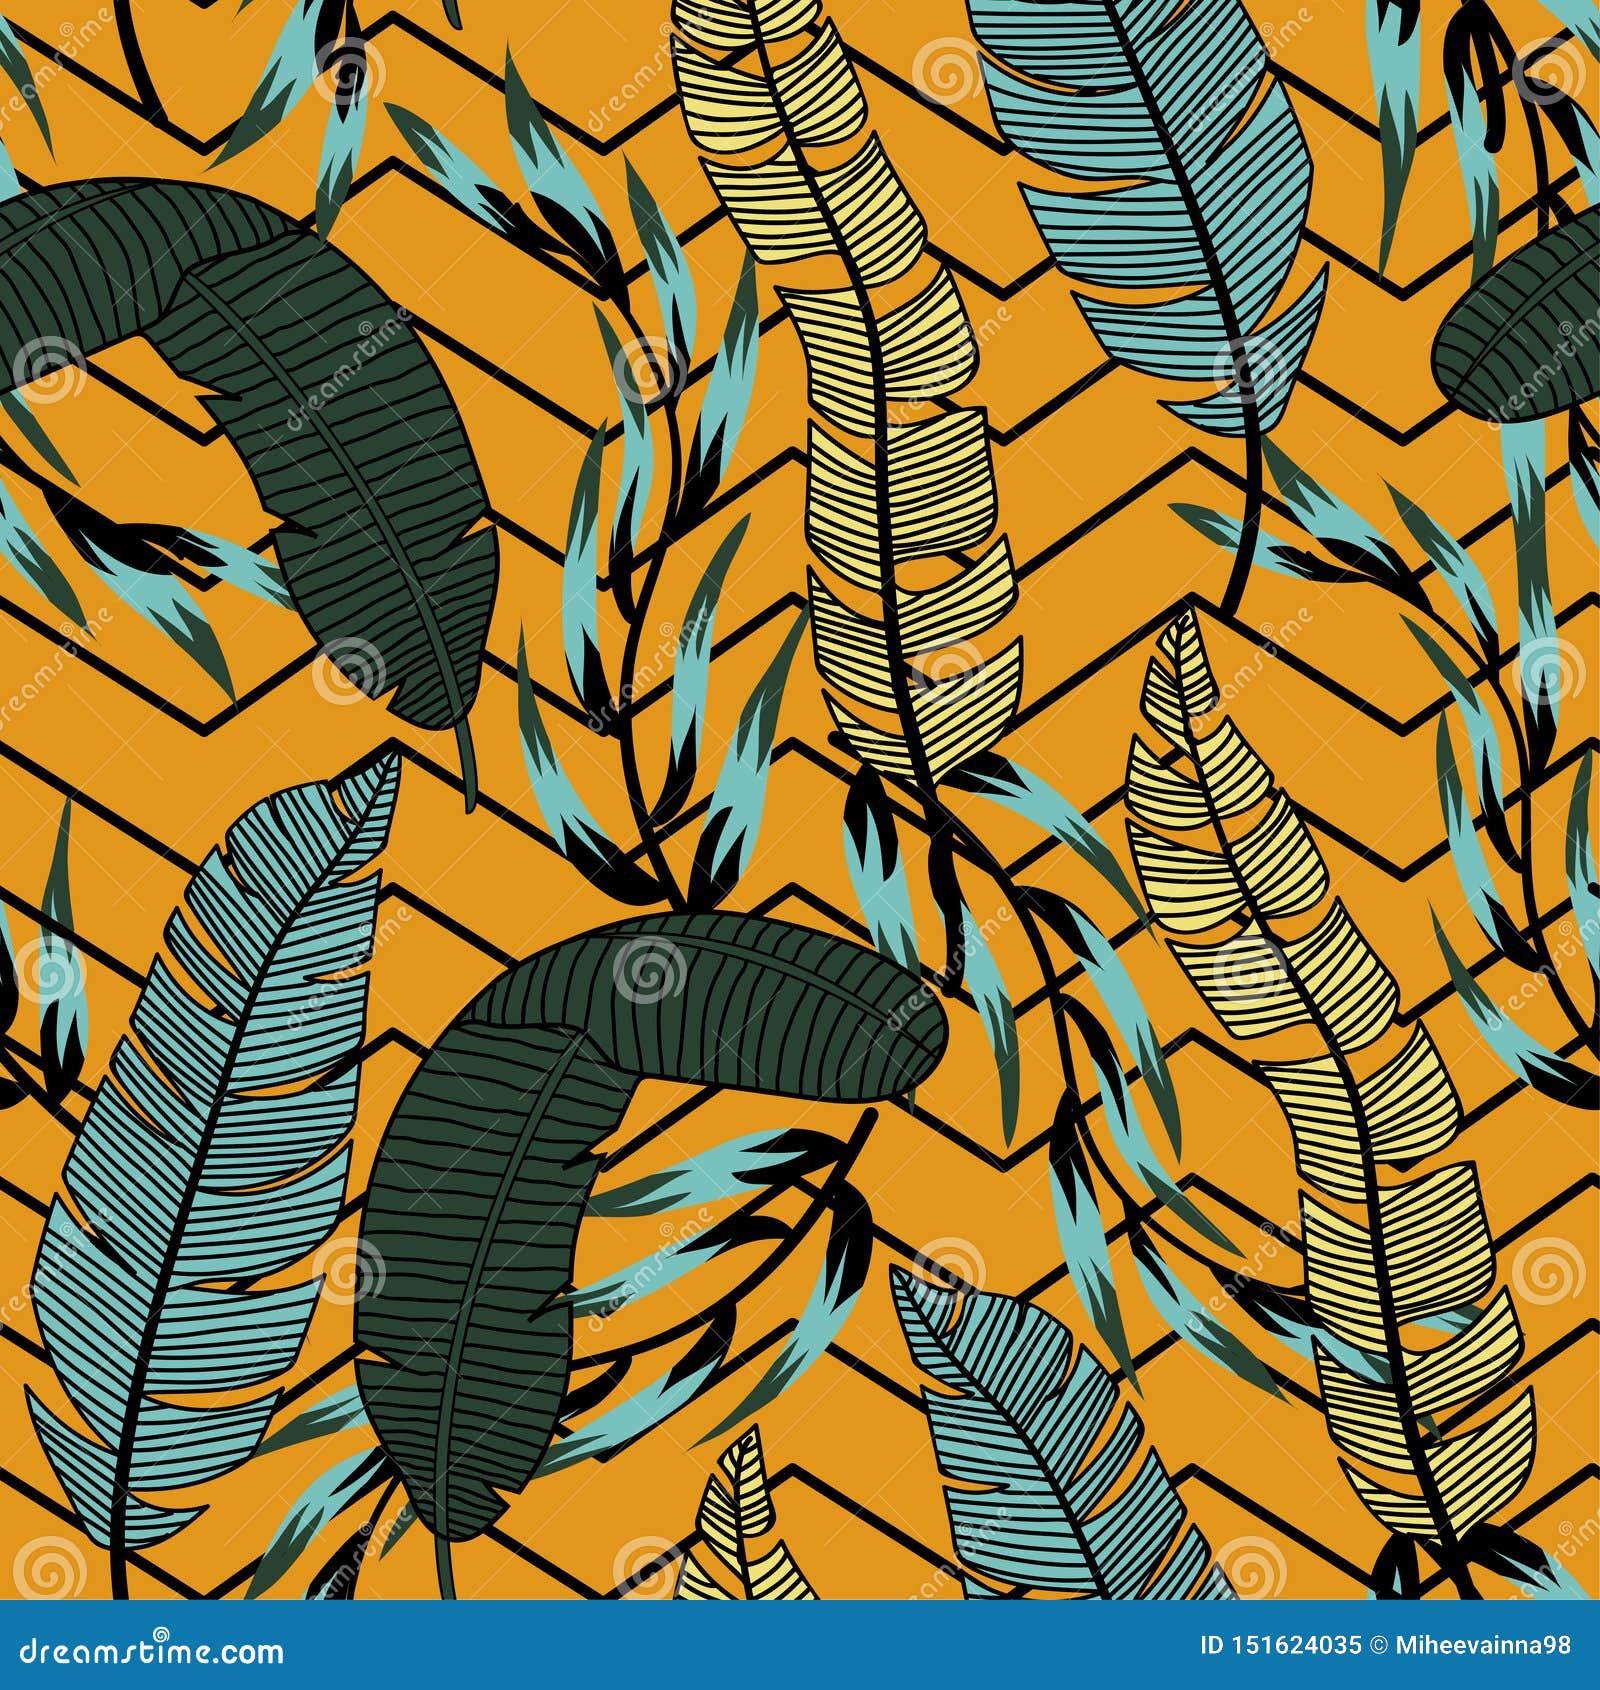 trendy abstract seamless pattern with colorful tropical leaves and flowers on an orange background.  . jungle print. f